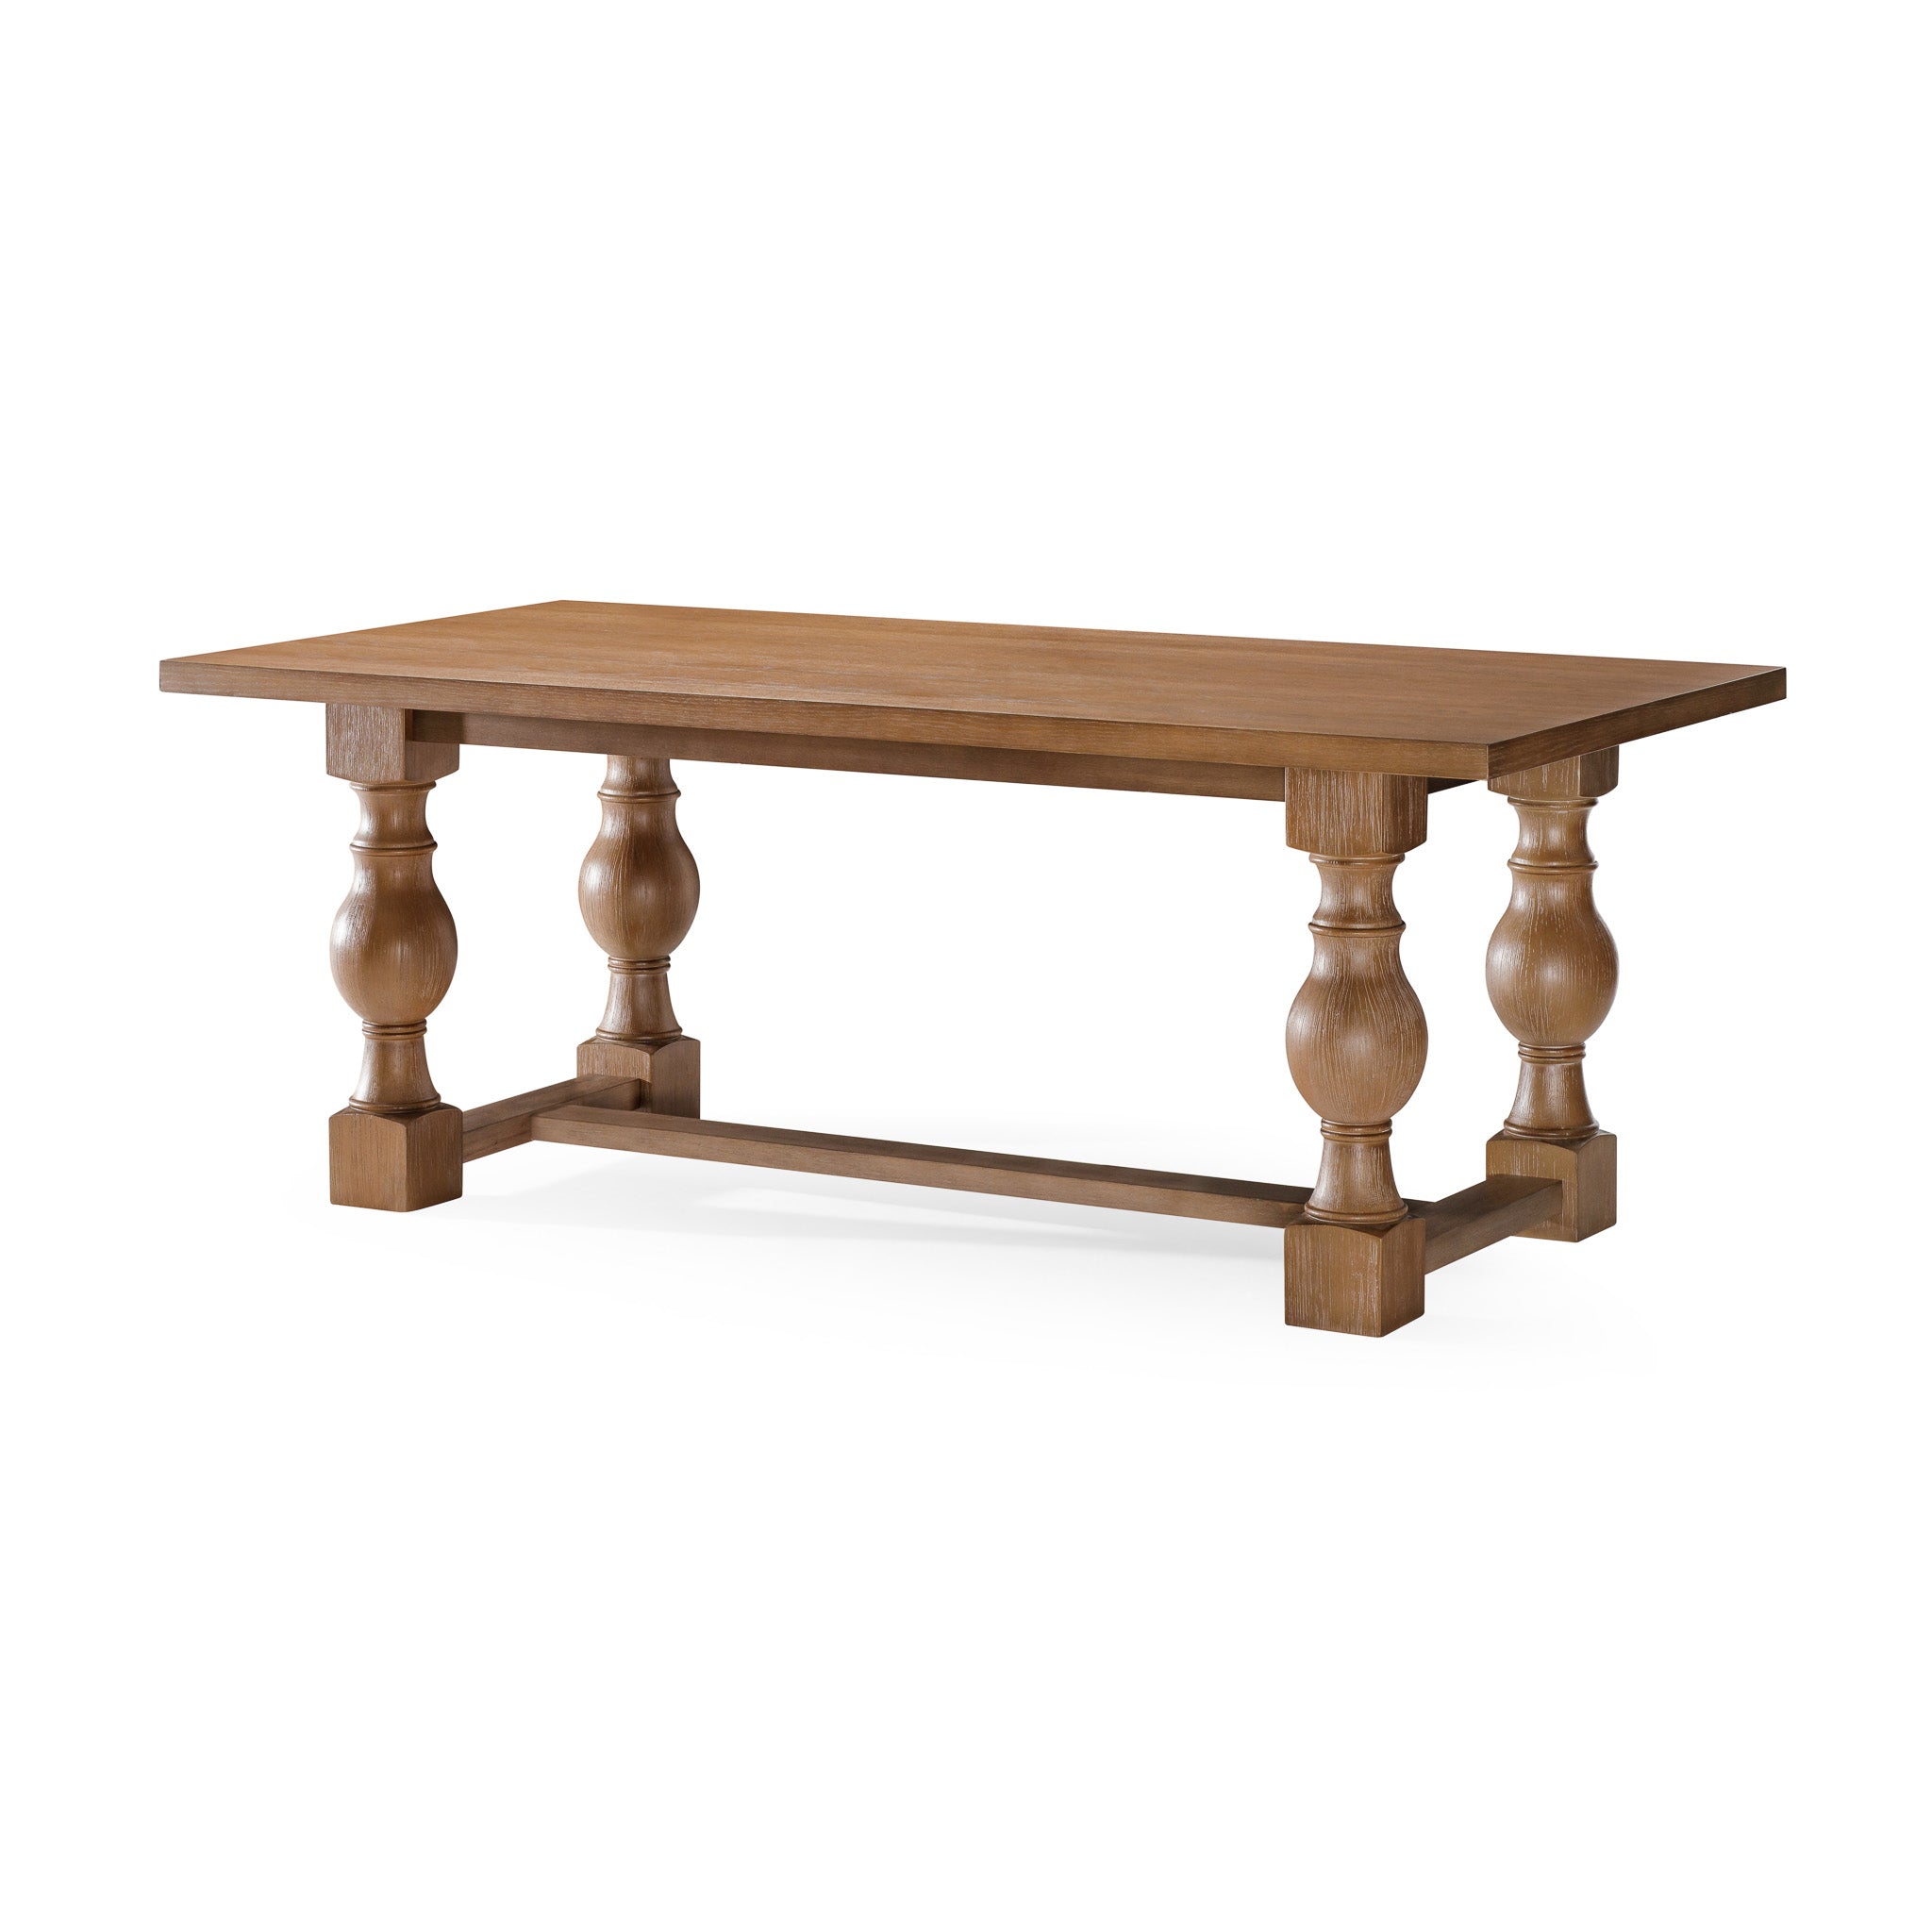 Leon Classical Wooden Dining Table in Antiqued Natural Finish in Dining Furniture by Maven Lane